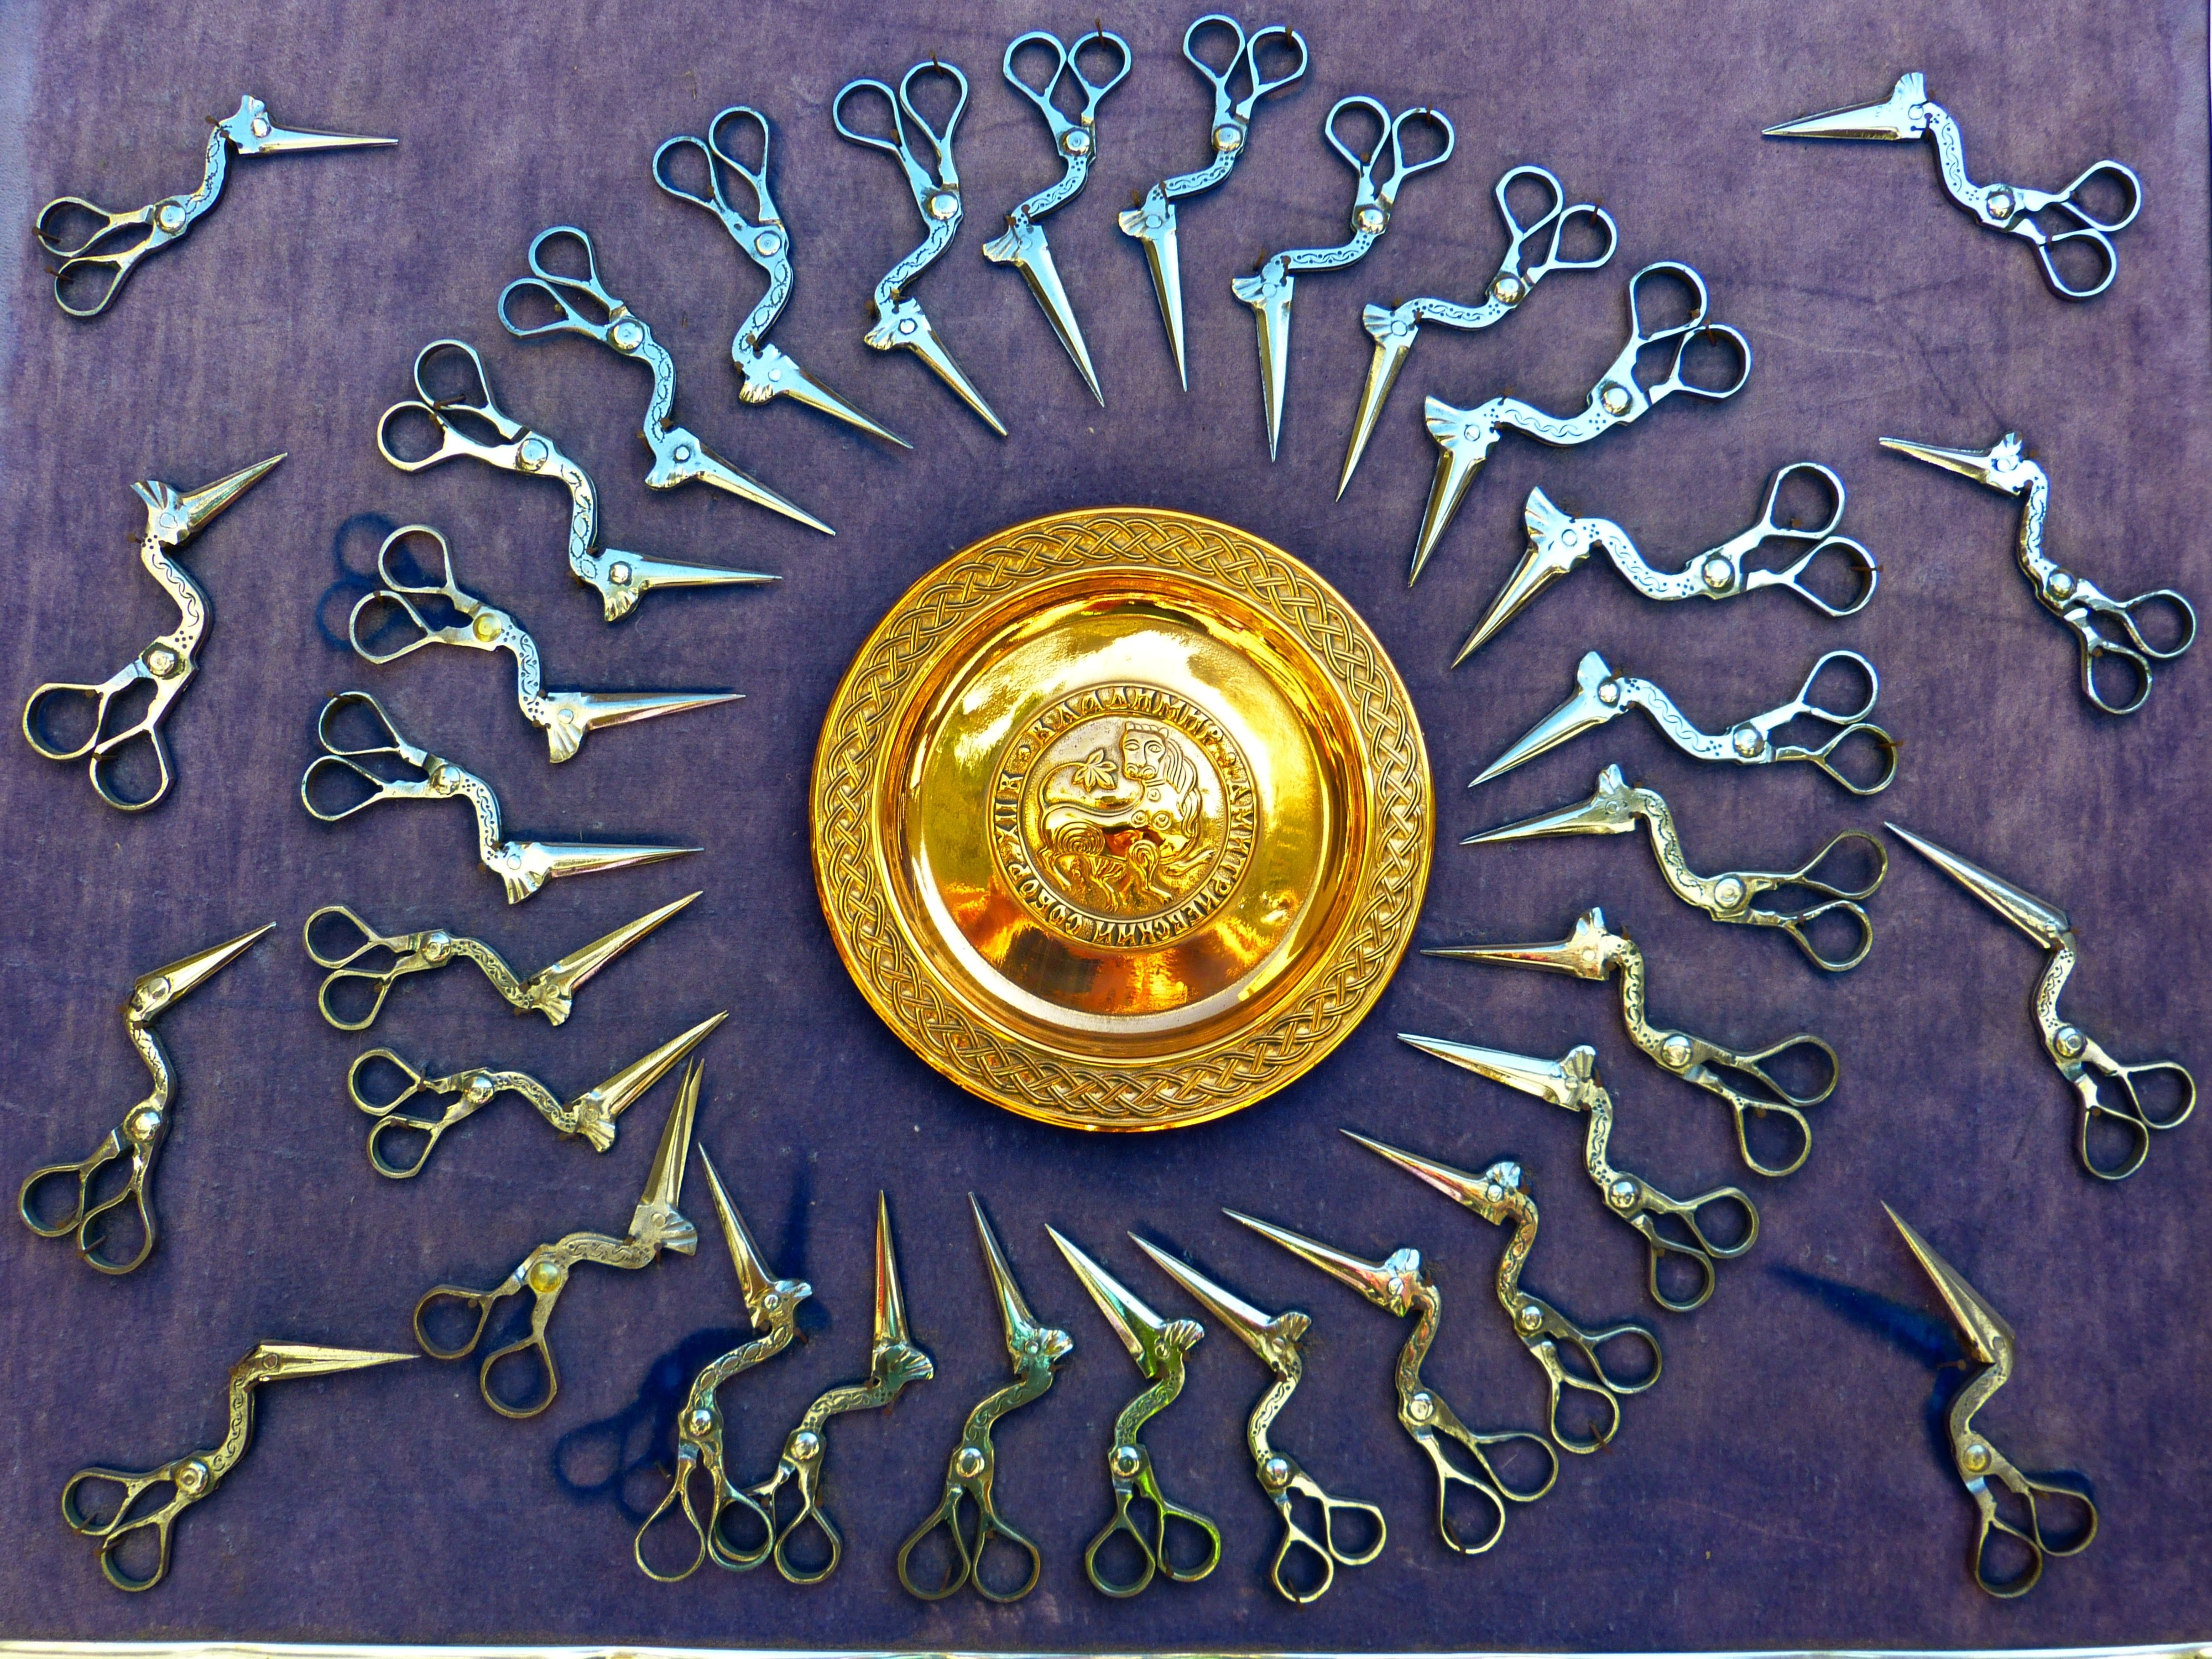 gold round emblem surrounding with scissors like